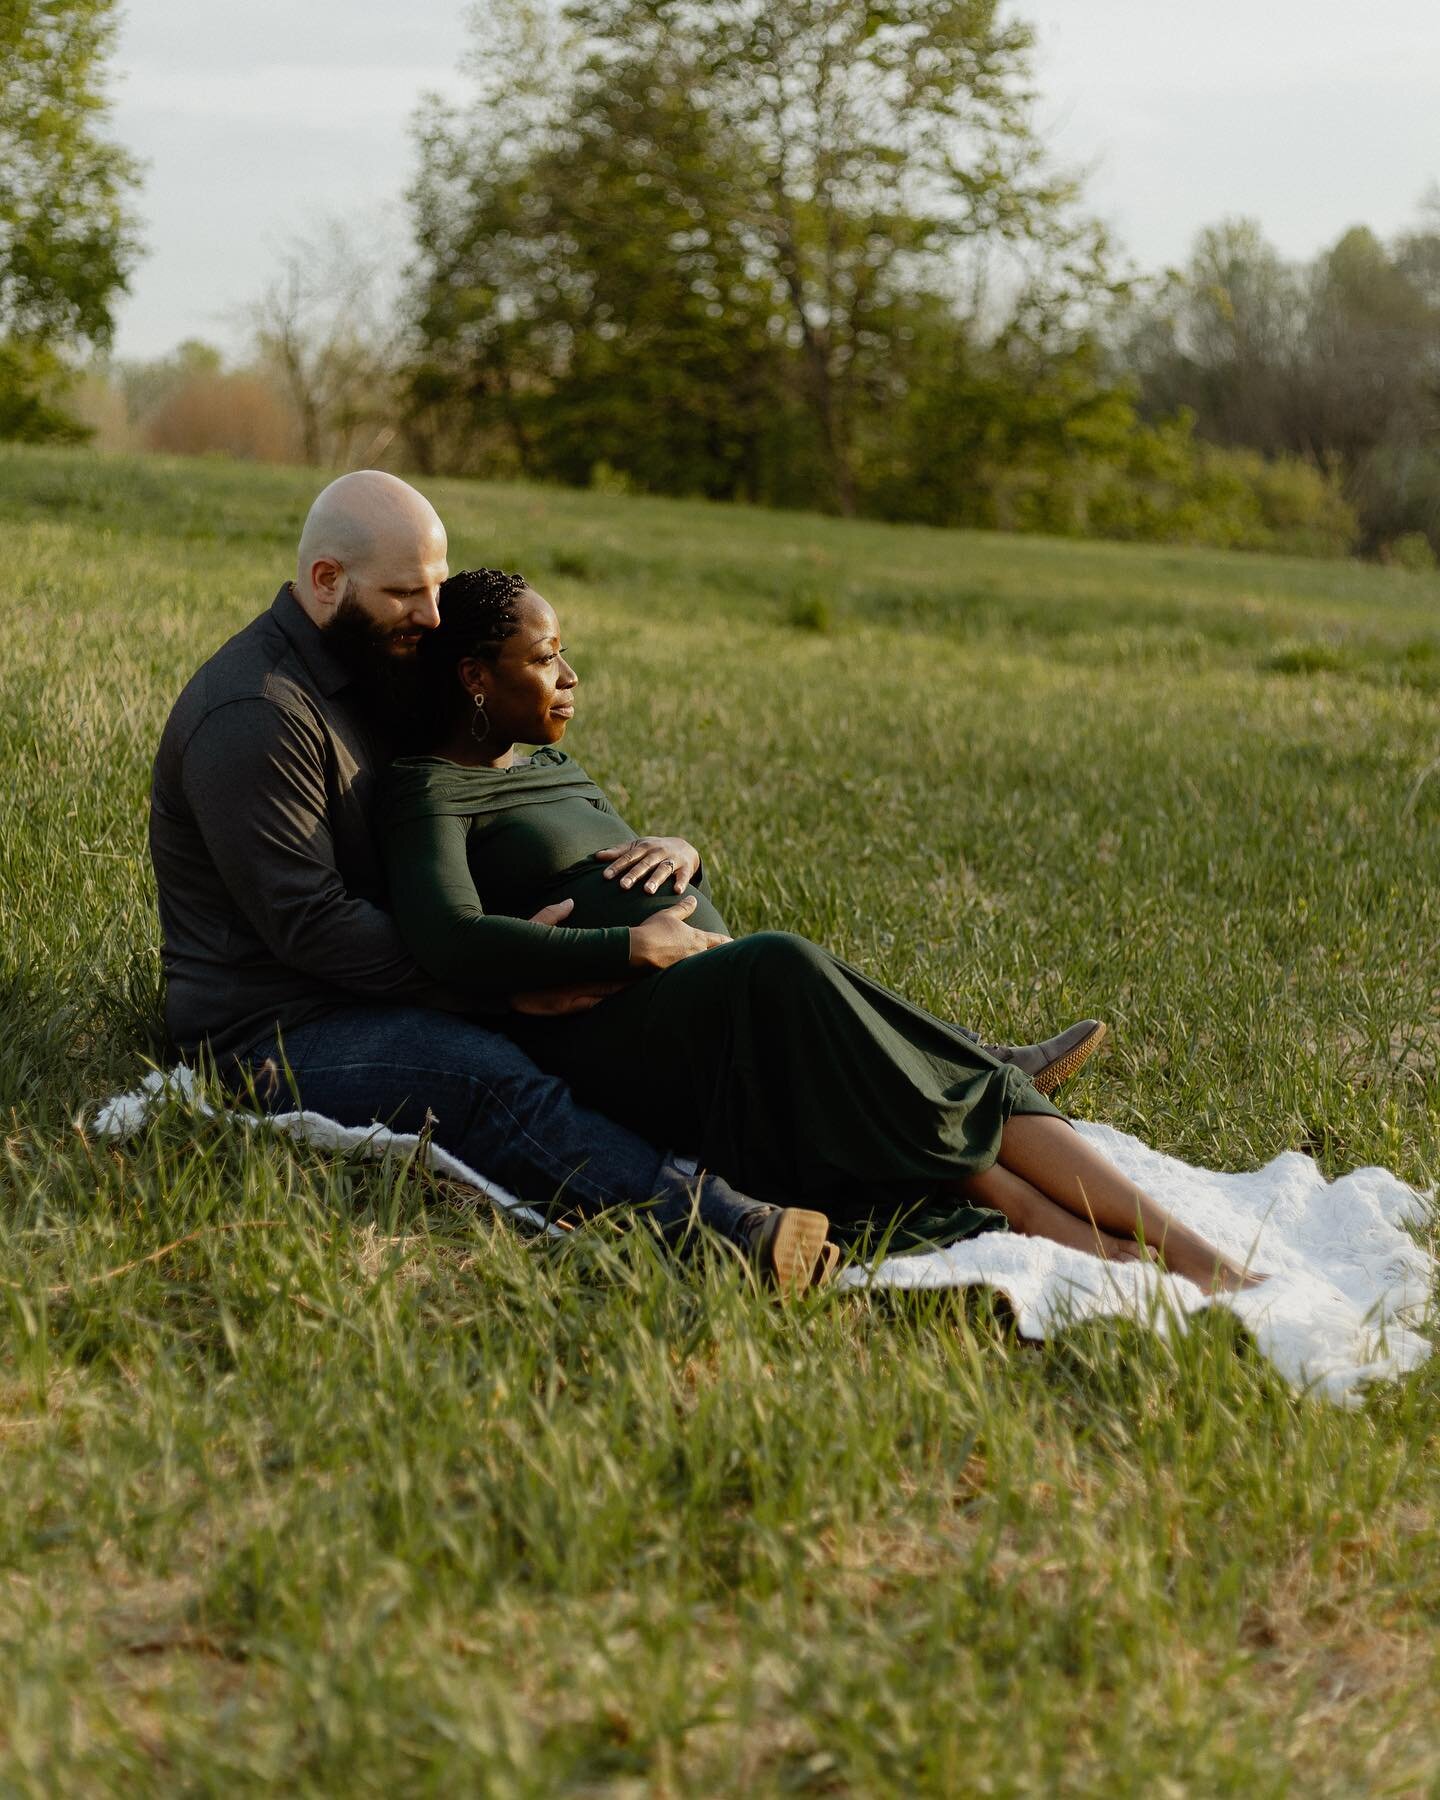 Gosh, have I missed GREEN.

There is something so special about a spring maternity session, everything so new and full of life. Congrats to these parents, their love for their new child blossoming like the cherry trees 💕